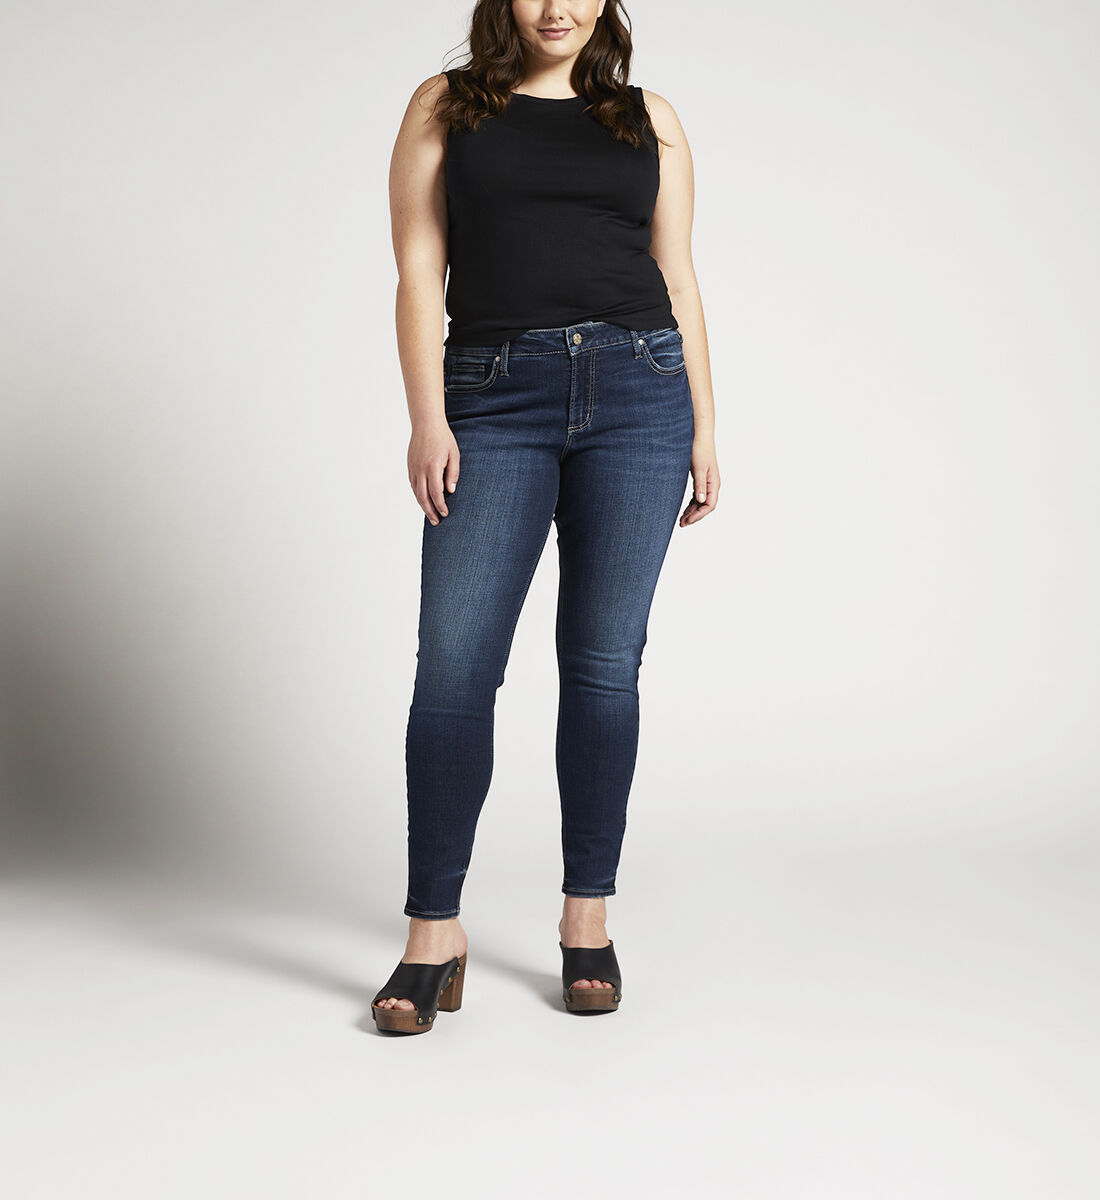 Elyse Mid Rise Skinny Jeans Plus Size Front